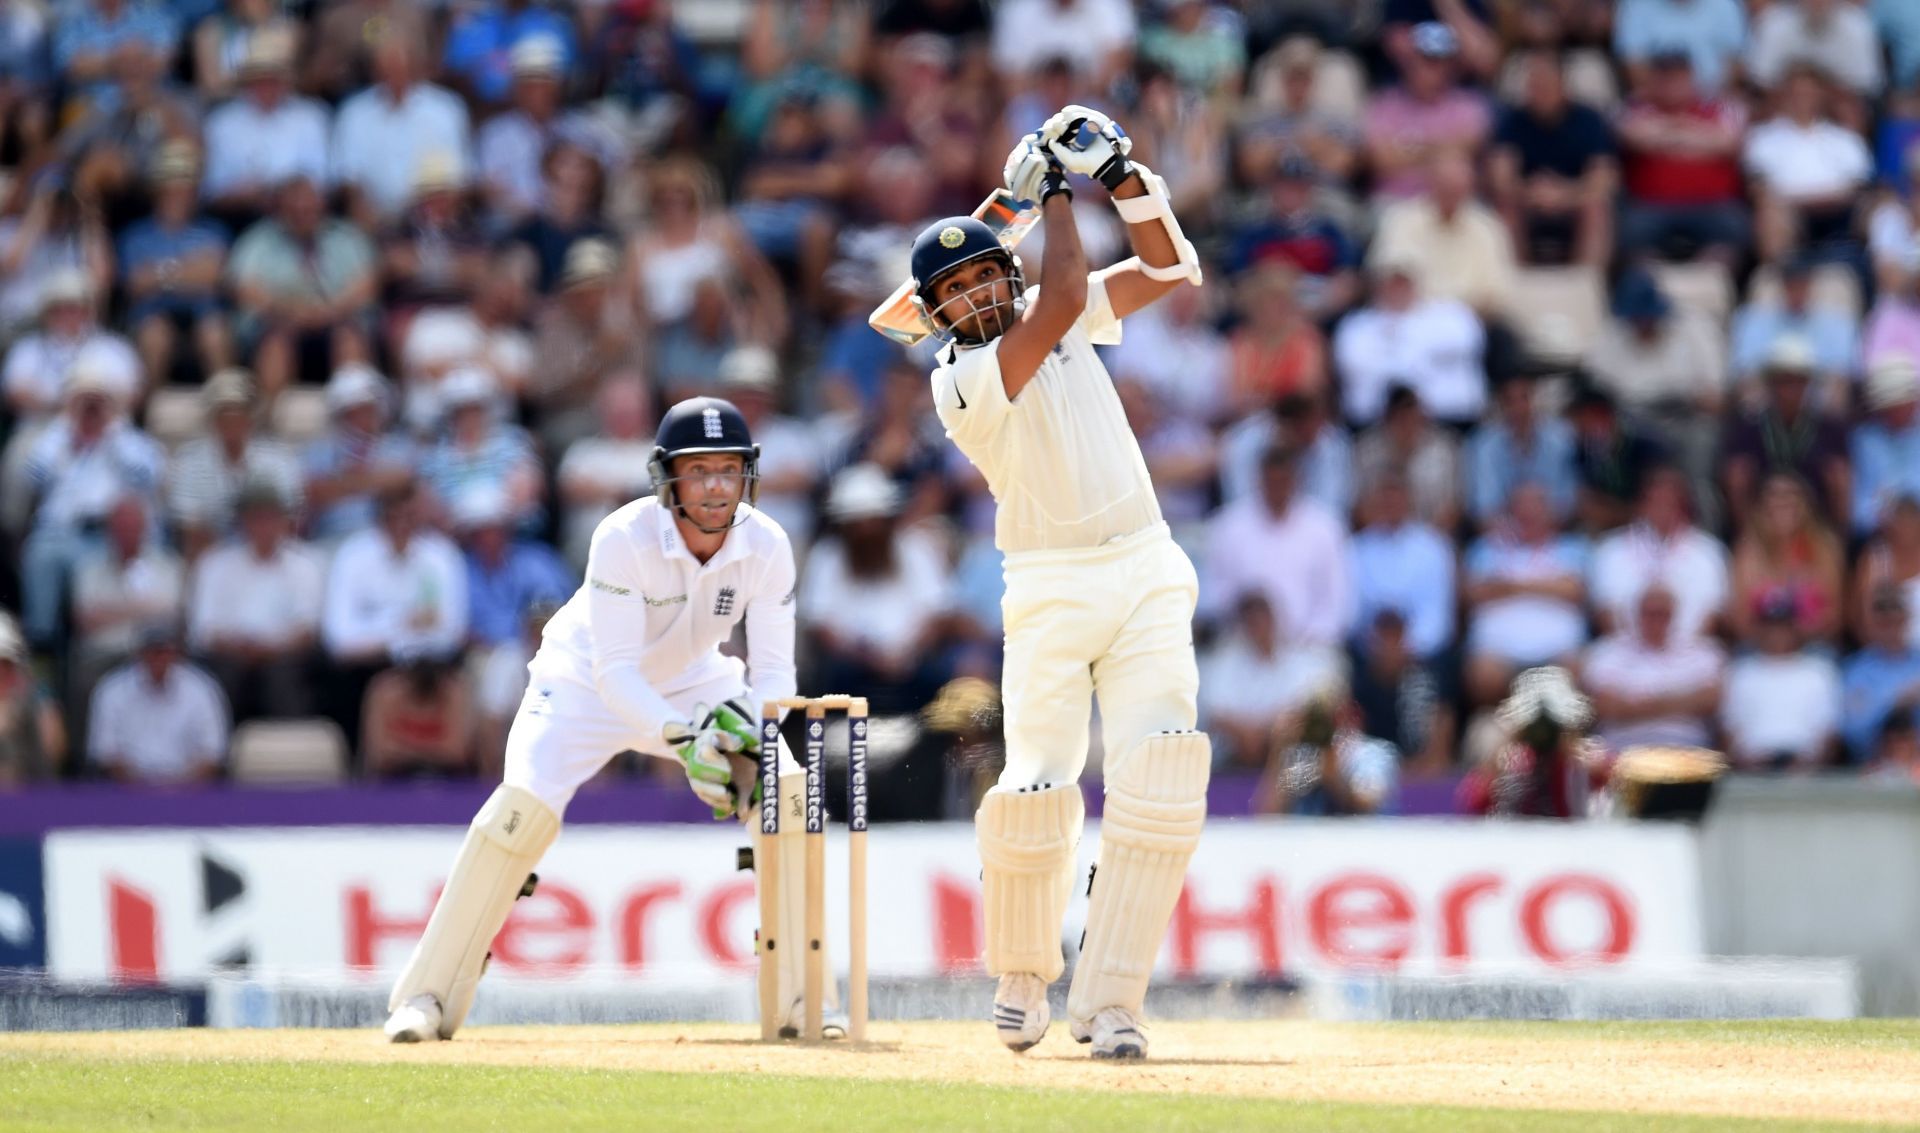 Rohit Sharma endured a tough patch after a great start to his Test career. (Pic: Getty Images)